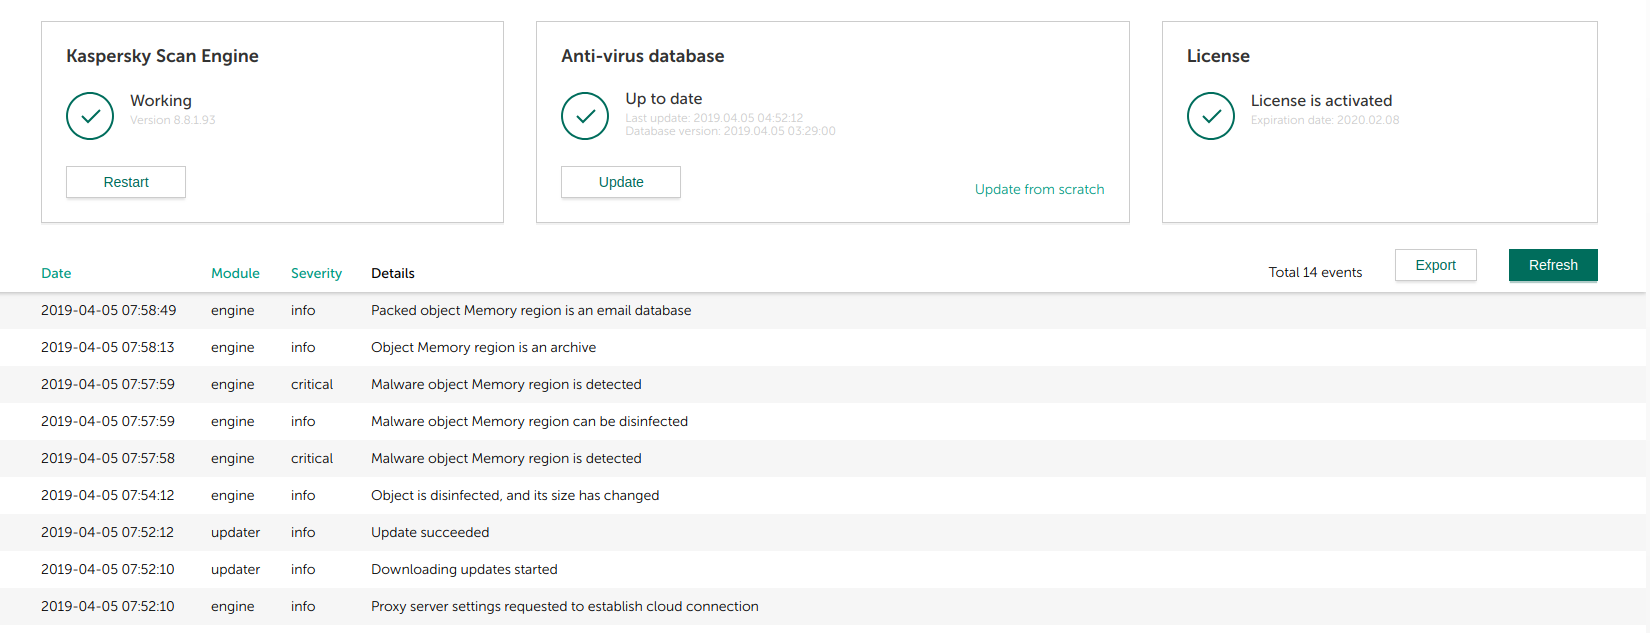 Dashboard showing the status of Kaspersky Scan Engine and Anti-Virus database, license information, and the table of Kaspersky Scan Engine events.